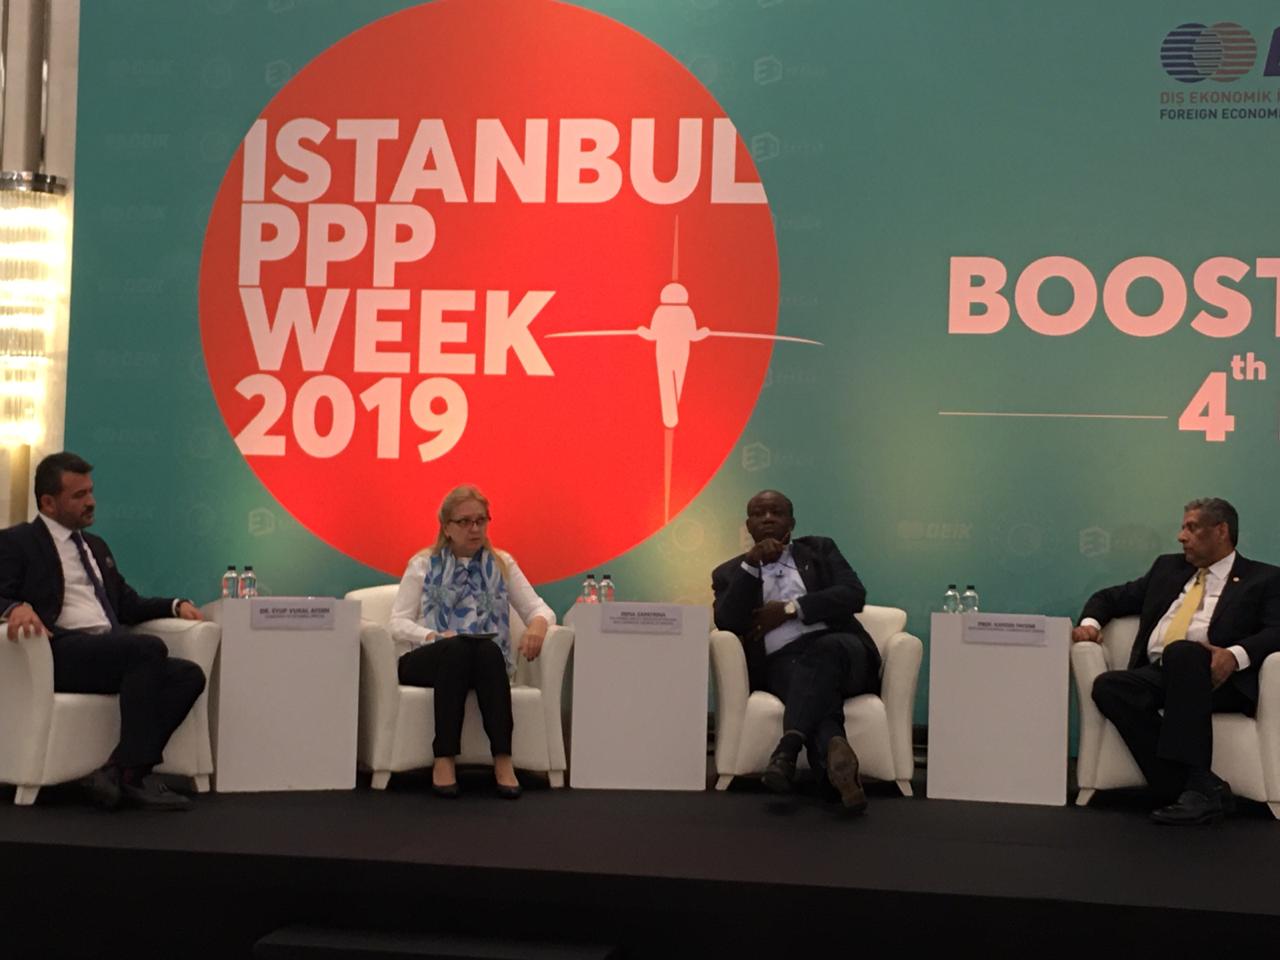 On October 30 – November 2, 2019  in Istanbul (Turkey) took place Istanbul PPP Week